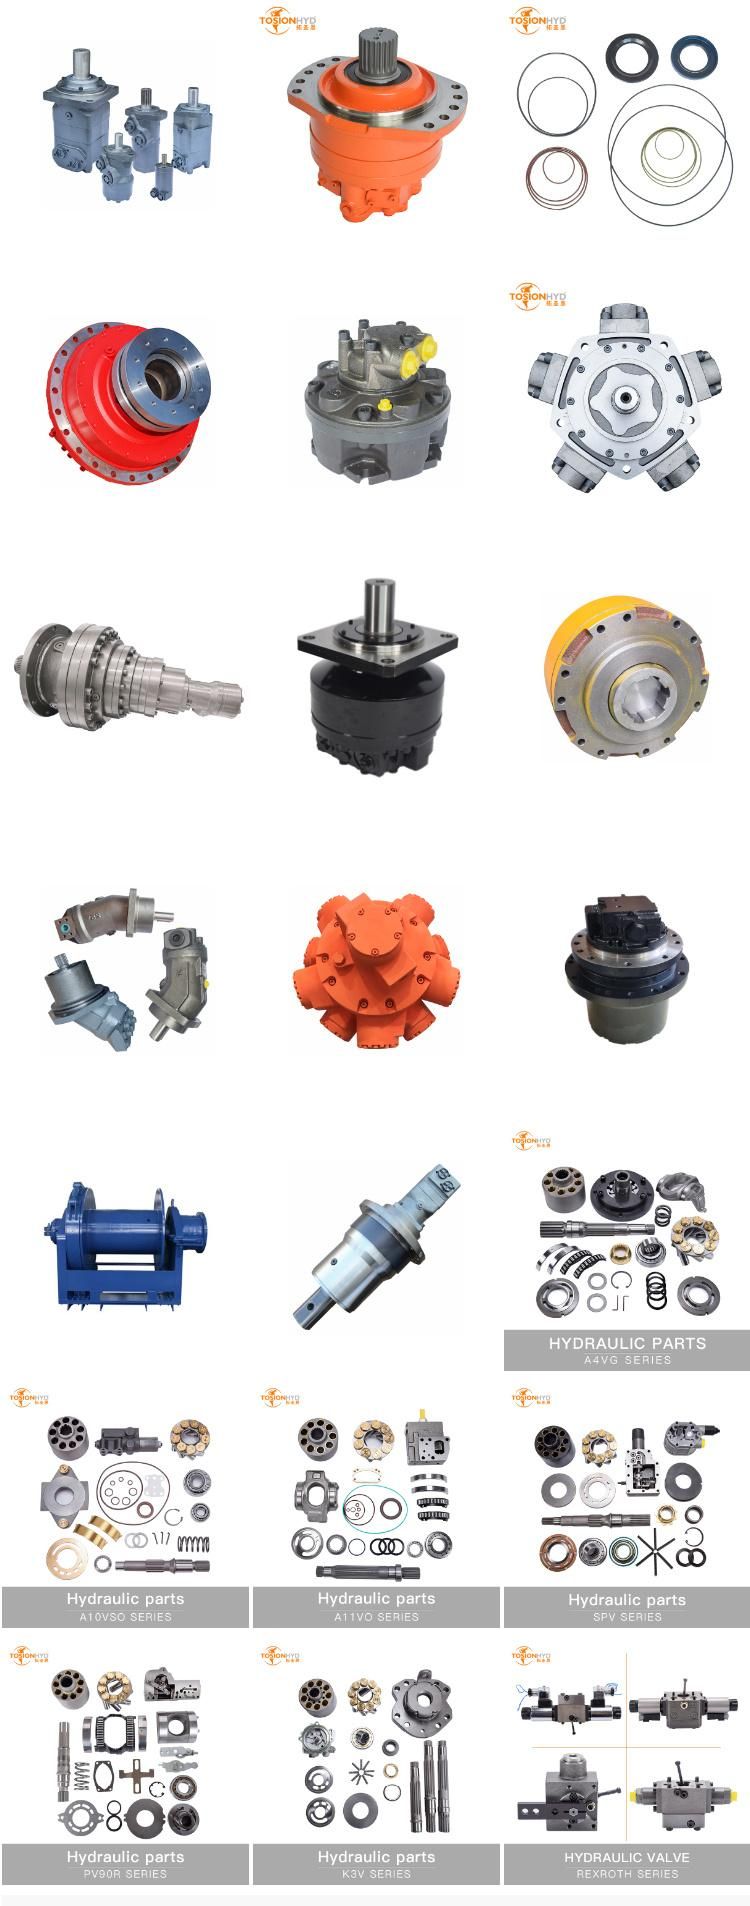 Hpr 55/75/90/100/105/130/135/165/210/280/105D/165D/160-01 Hydraulic Pump Parts with Linde Spare Parts